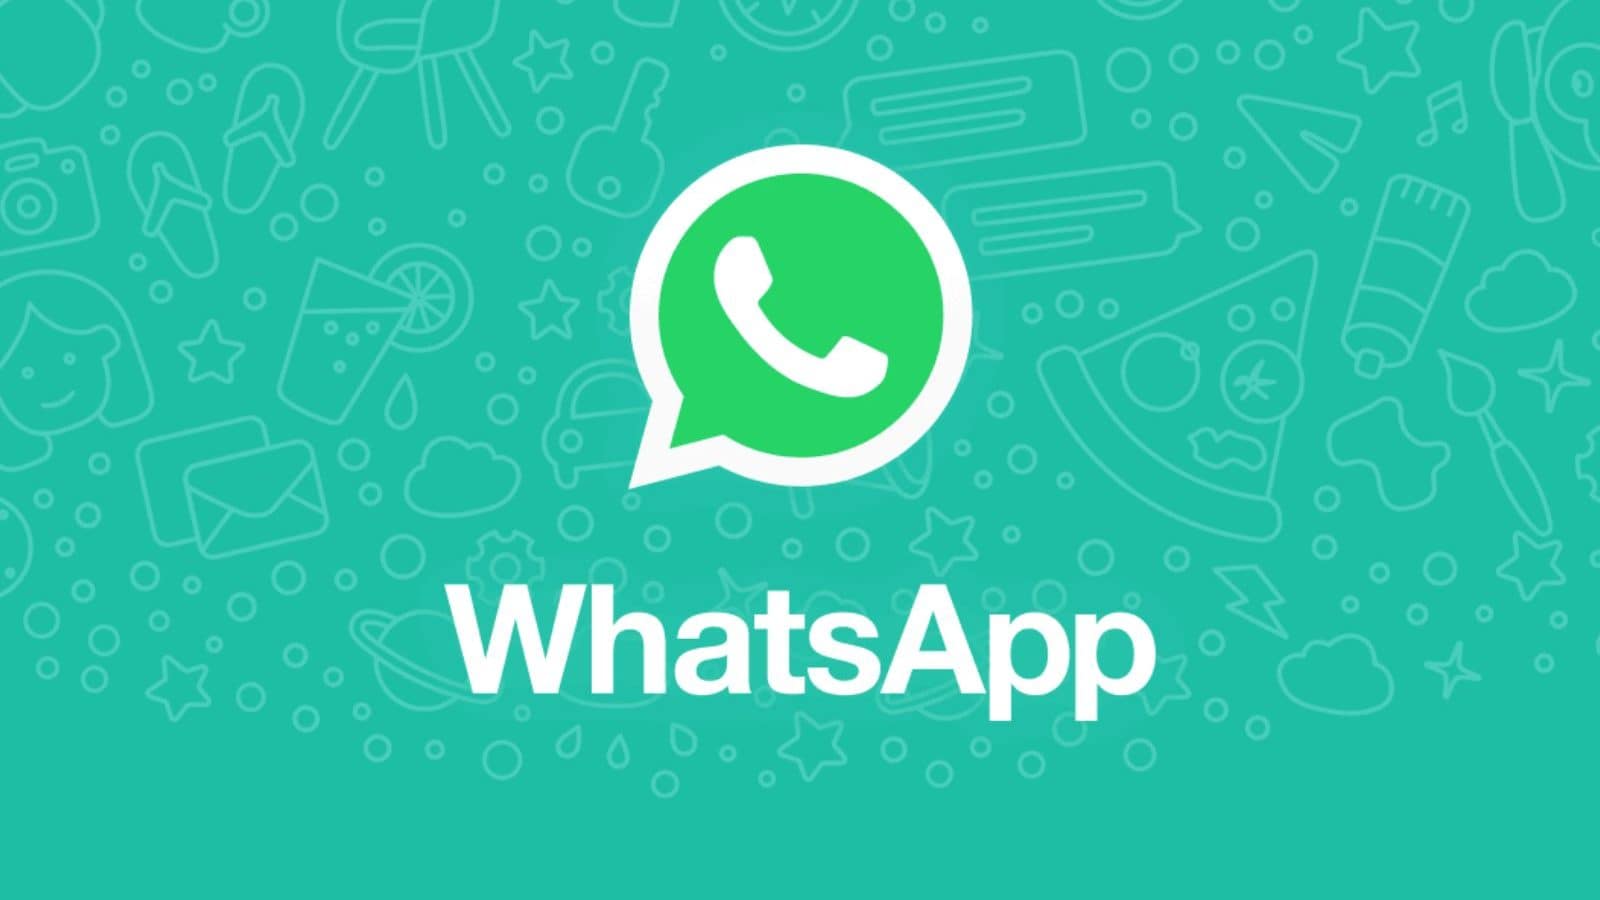 WhatsApp Releases Native Beta App For macOS, Offering Improved User Experience: Report